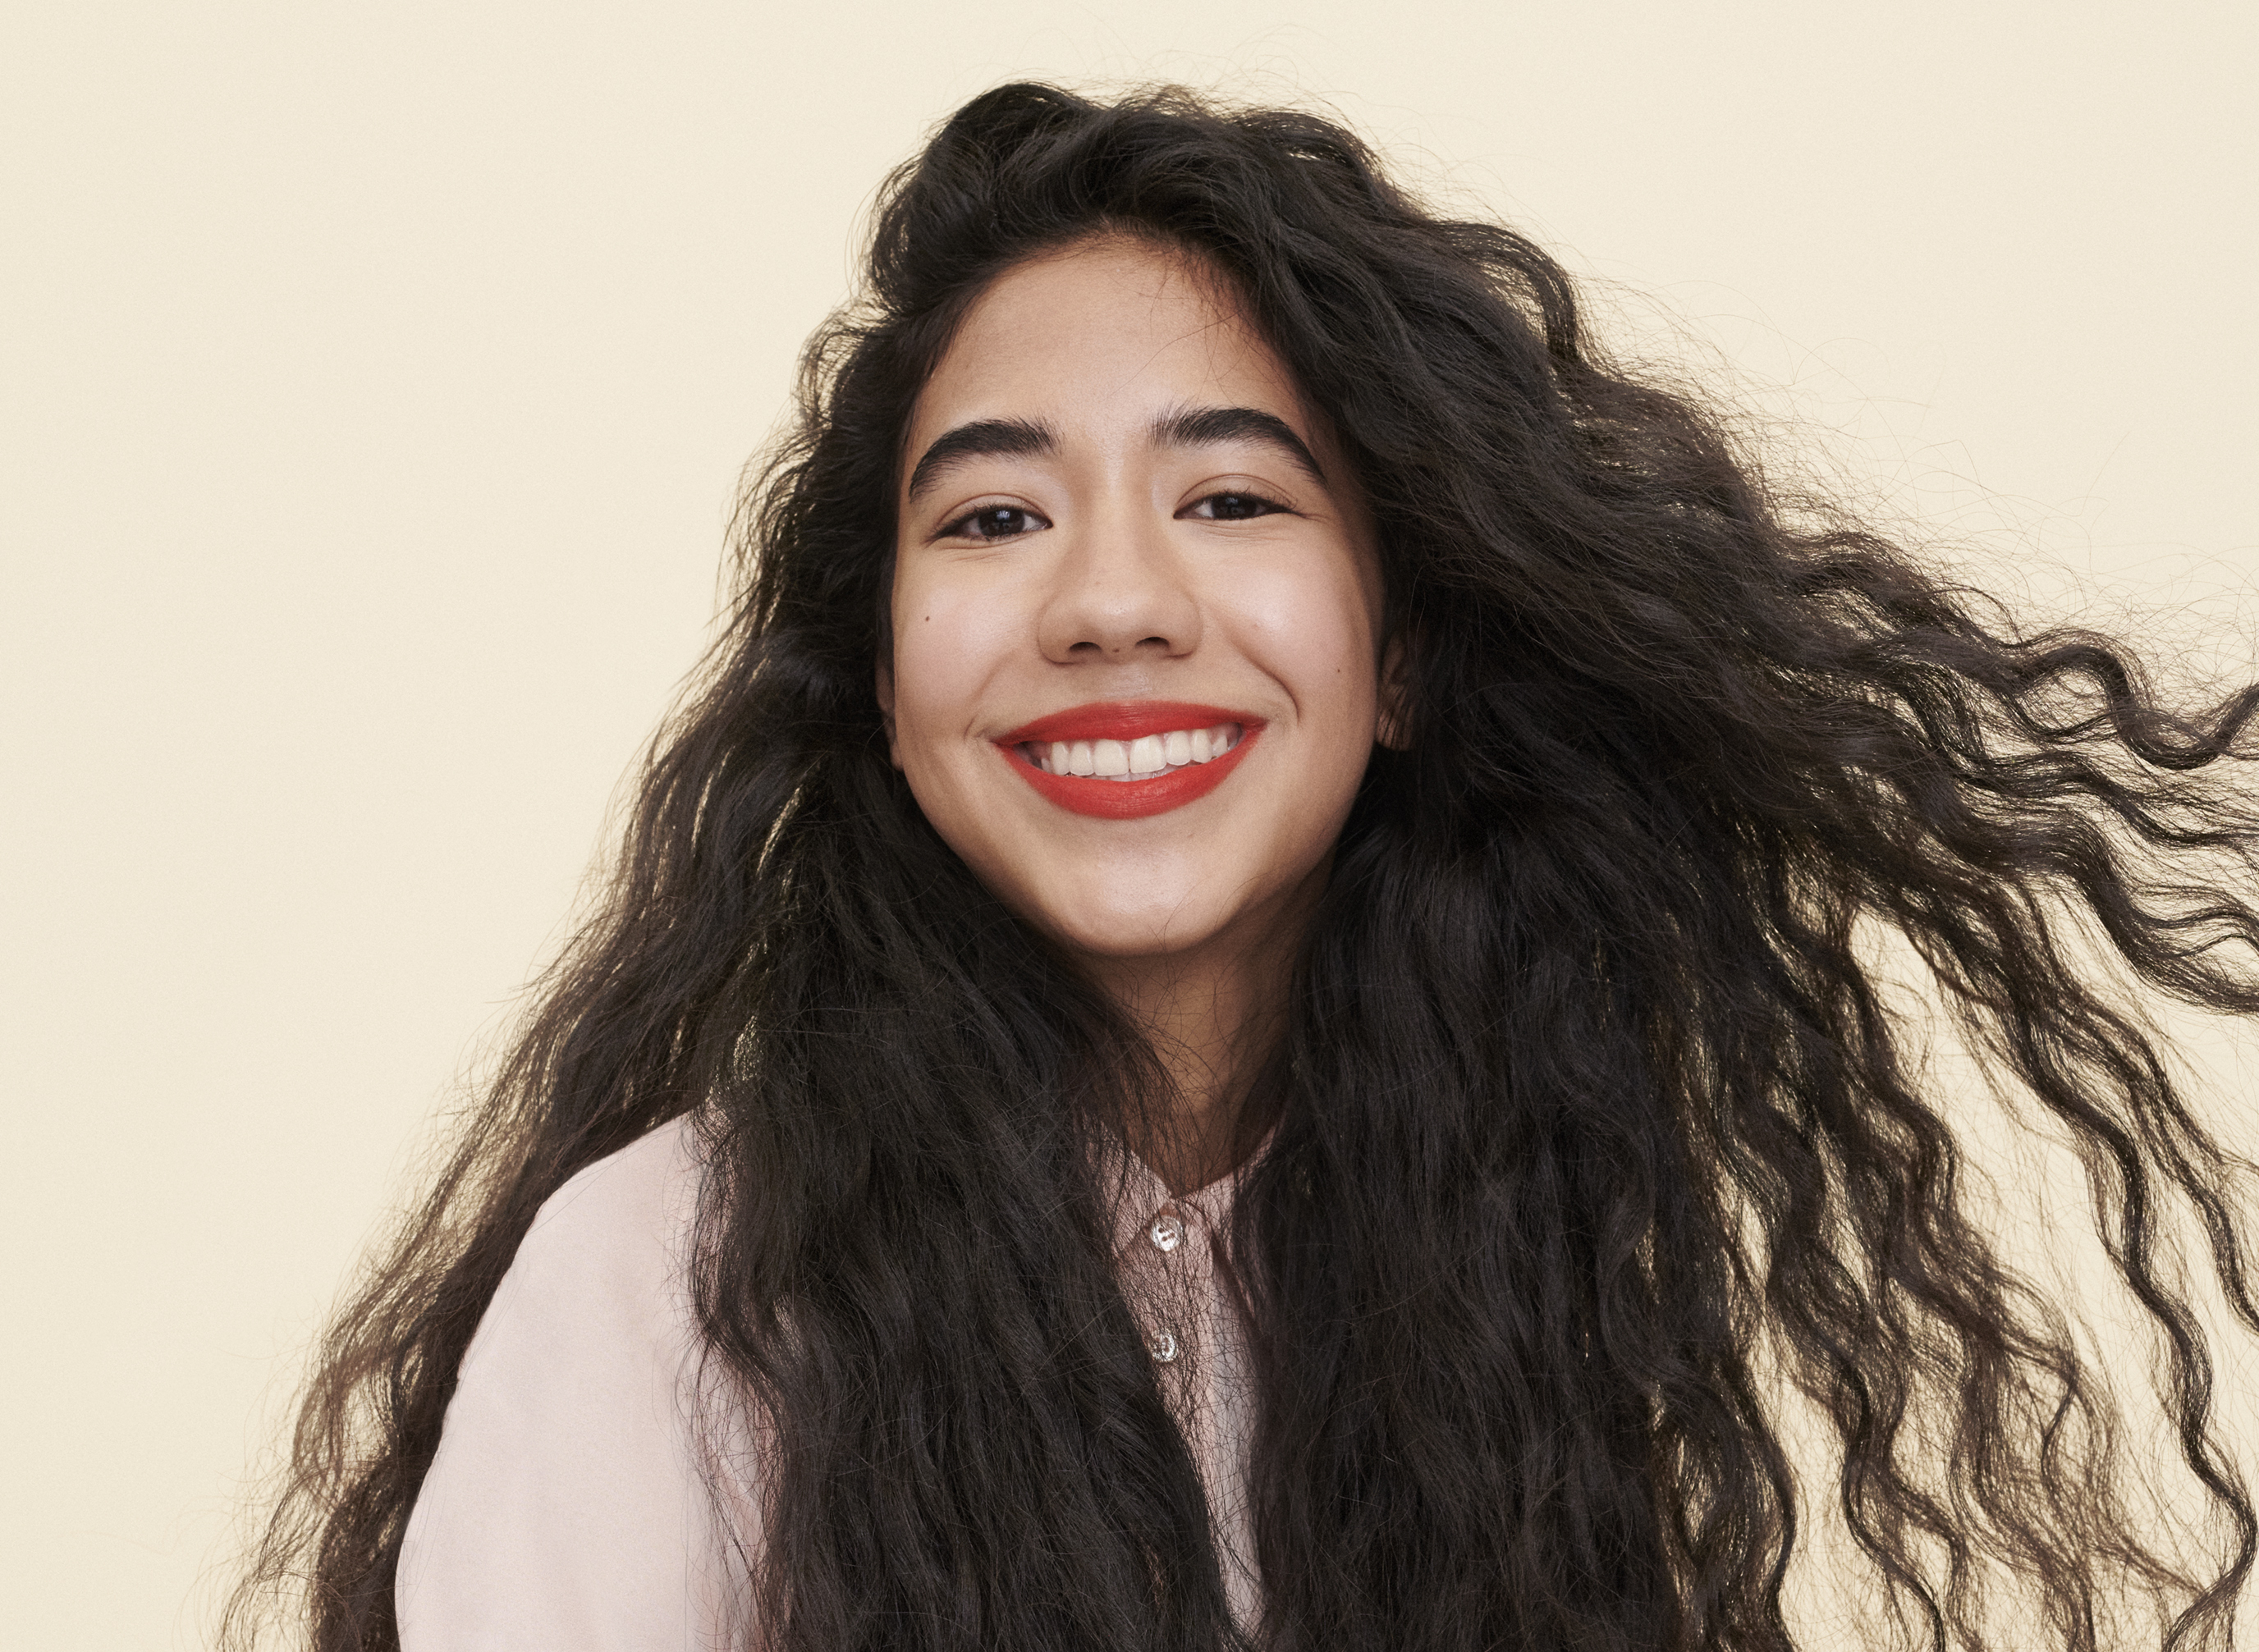 girl with long, brown curly hair smiles while wearing red lipstick